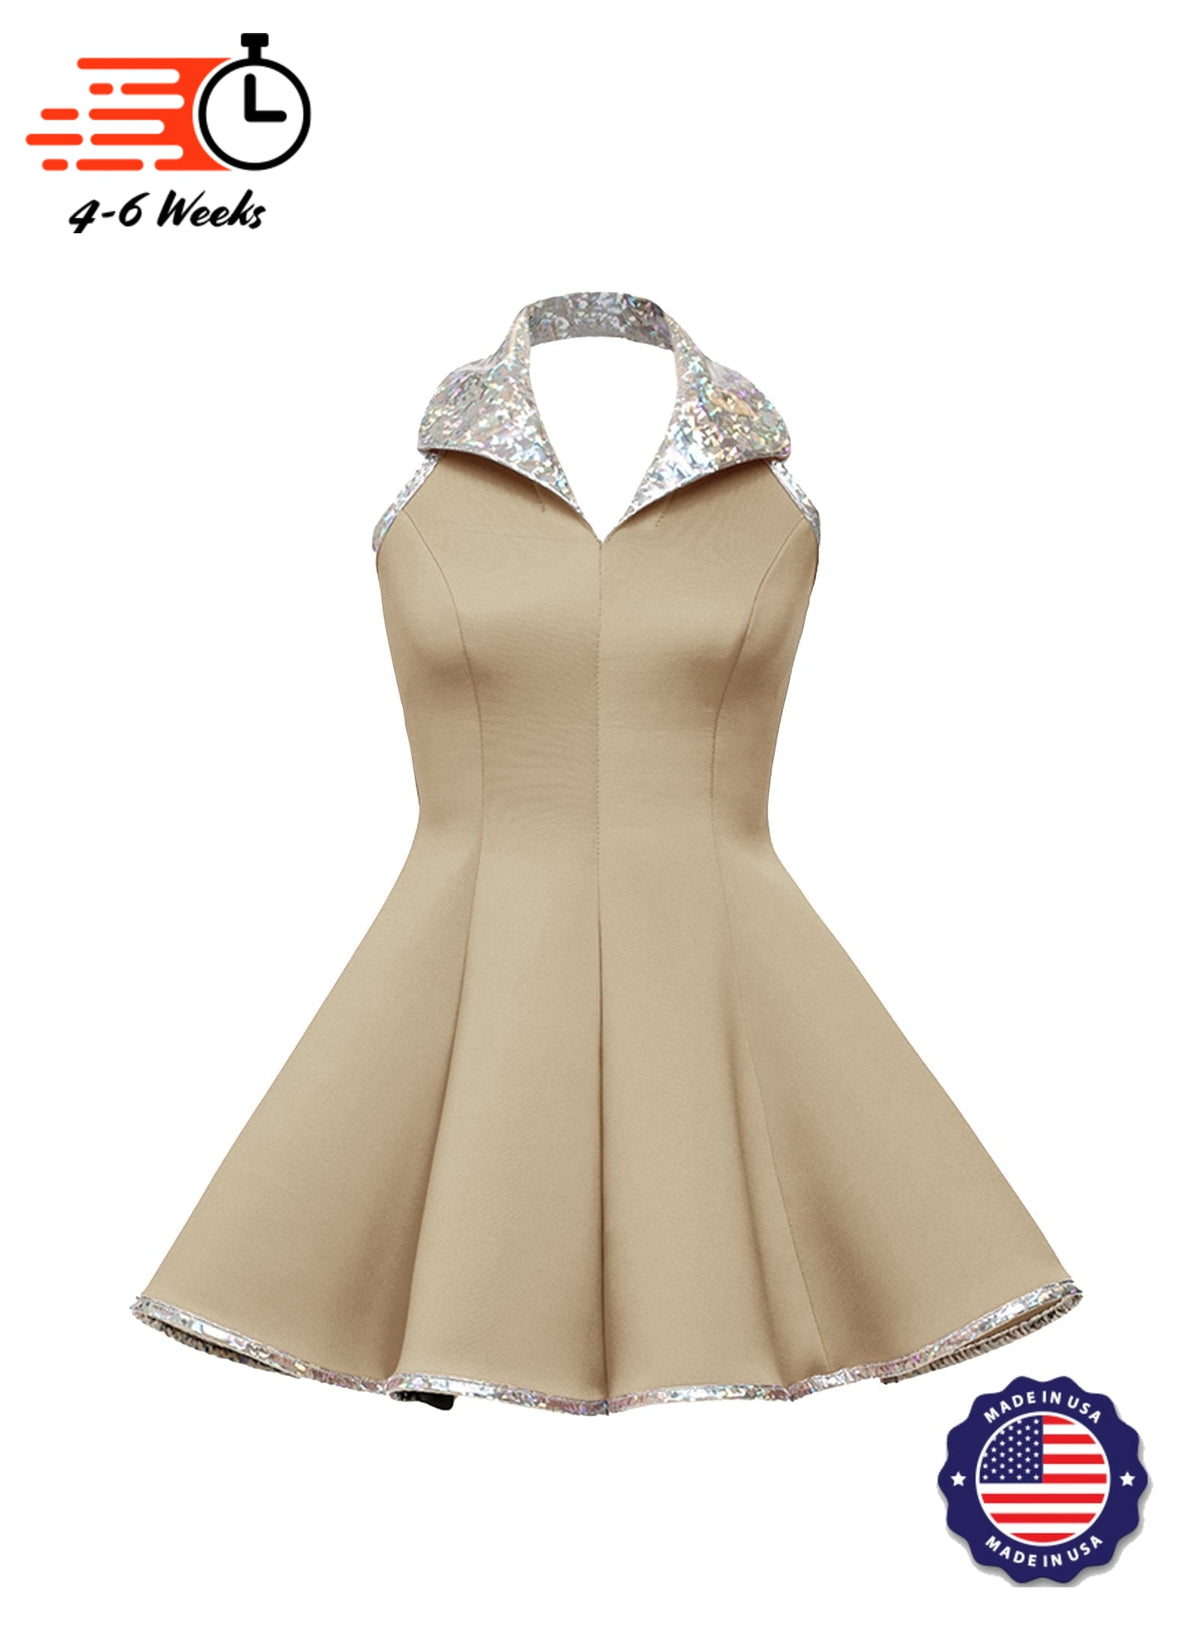 Lapel Collar Princess Panel Show Choir Dress - Neutrals and Black - Ships 4 to 6 weeks